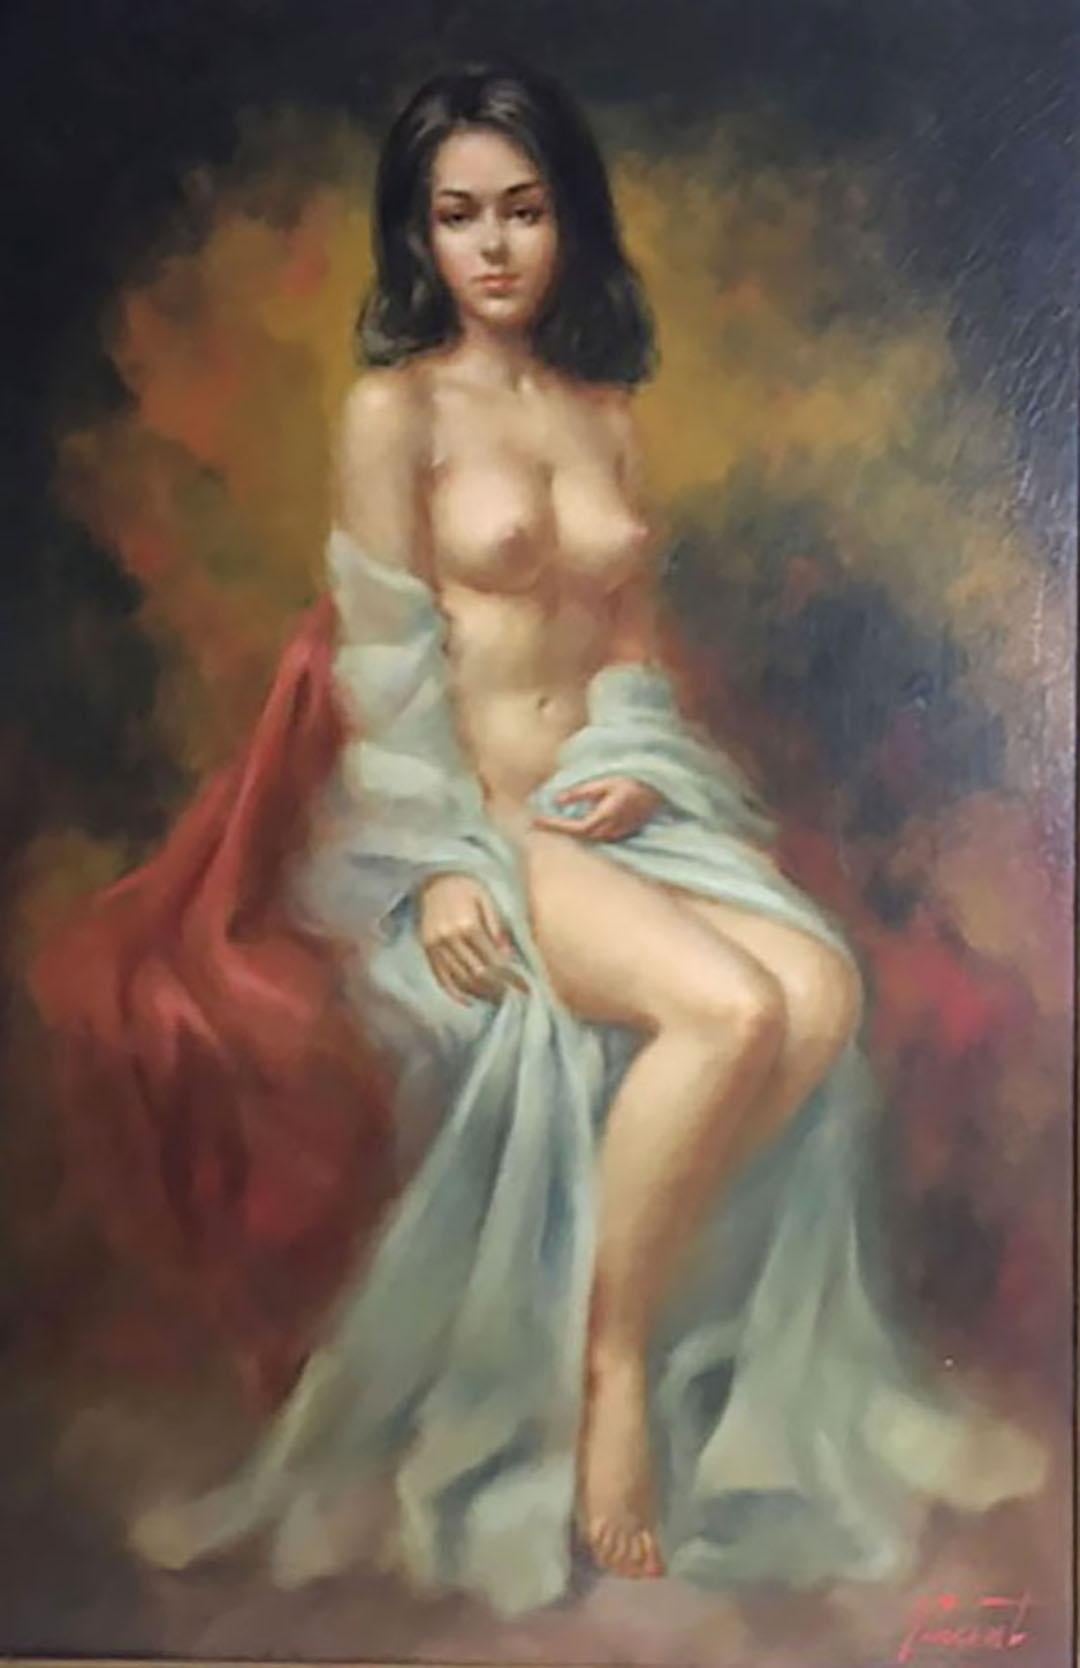 Internationally know American artist Larry “Vincent” Garrison who is known for his style of creating “soft skin”. Painting on the reverse side of Masonite board his art portrays the translucent quality of skin along with his balance of delicate